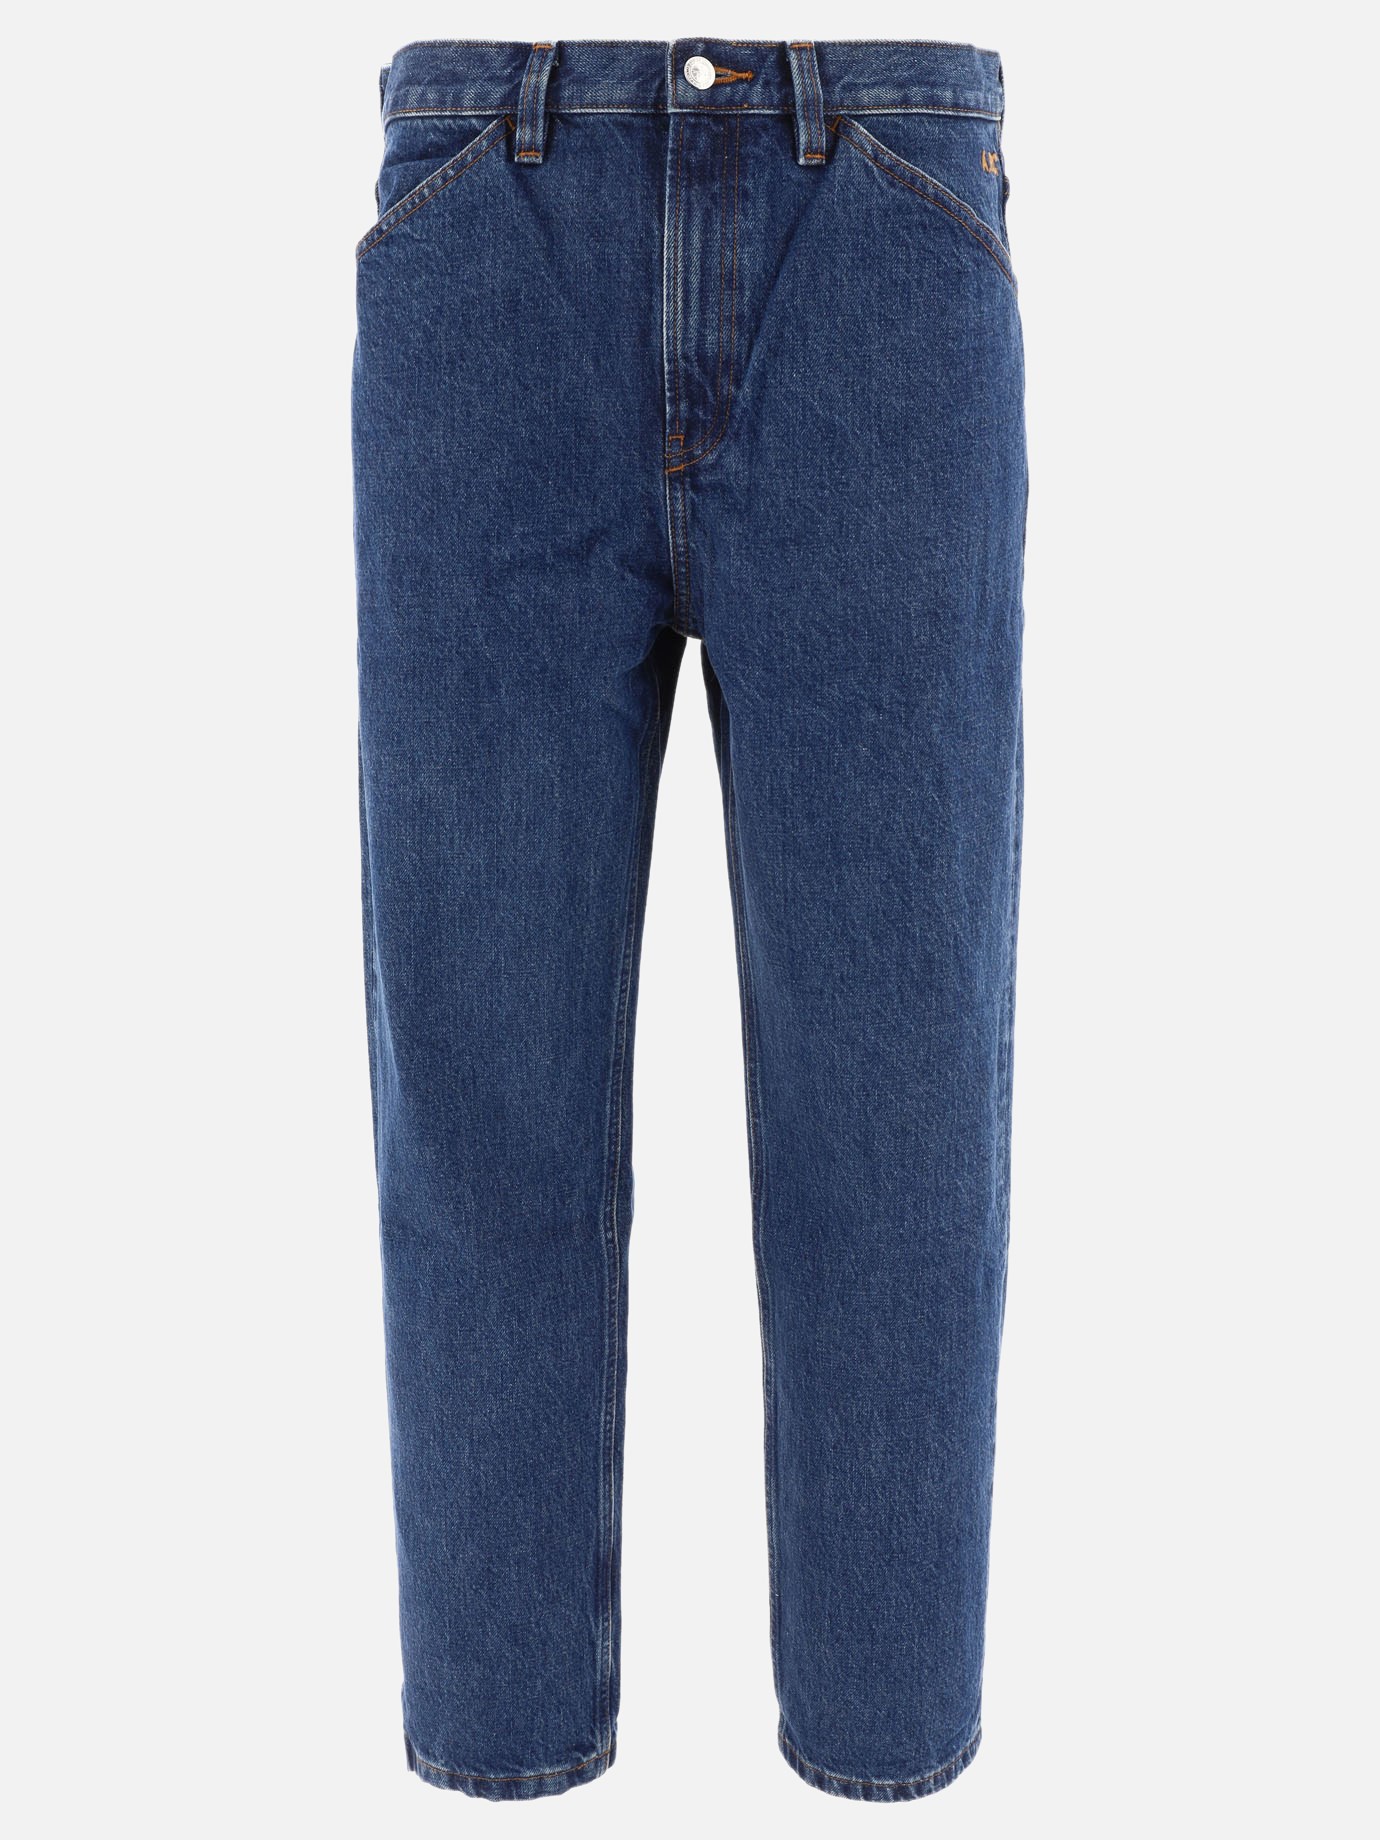 Jeans  Marian  by A.P.C.